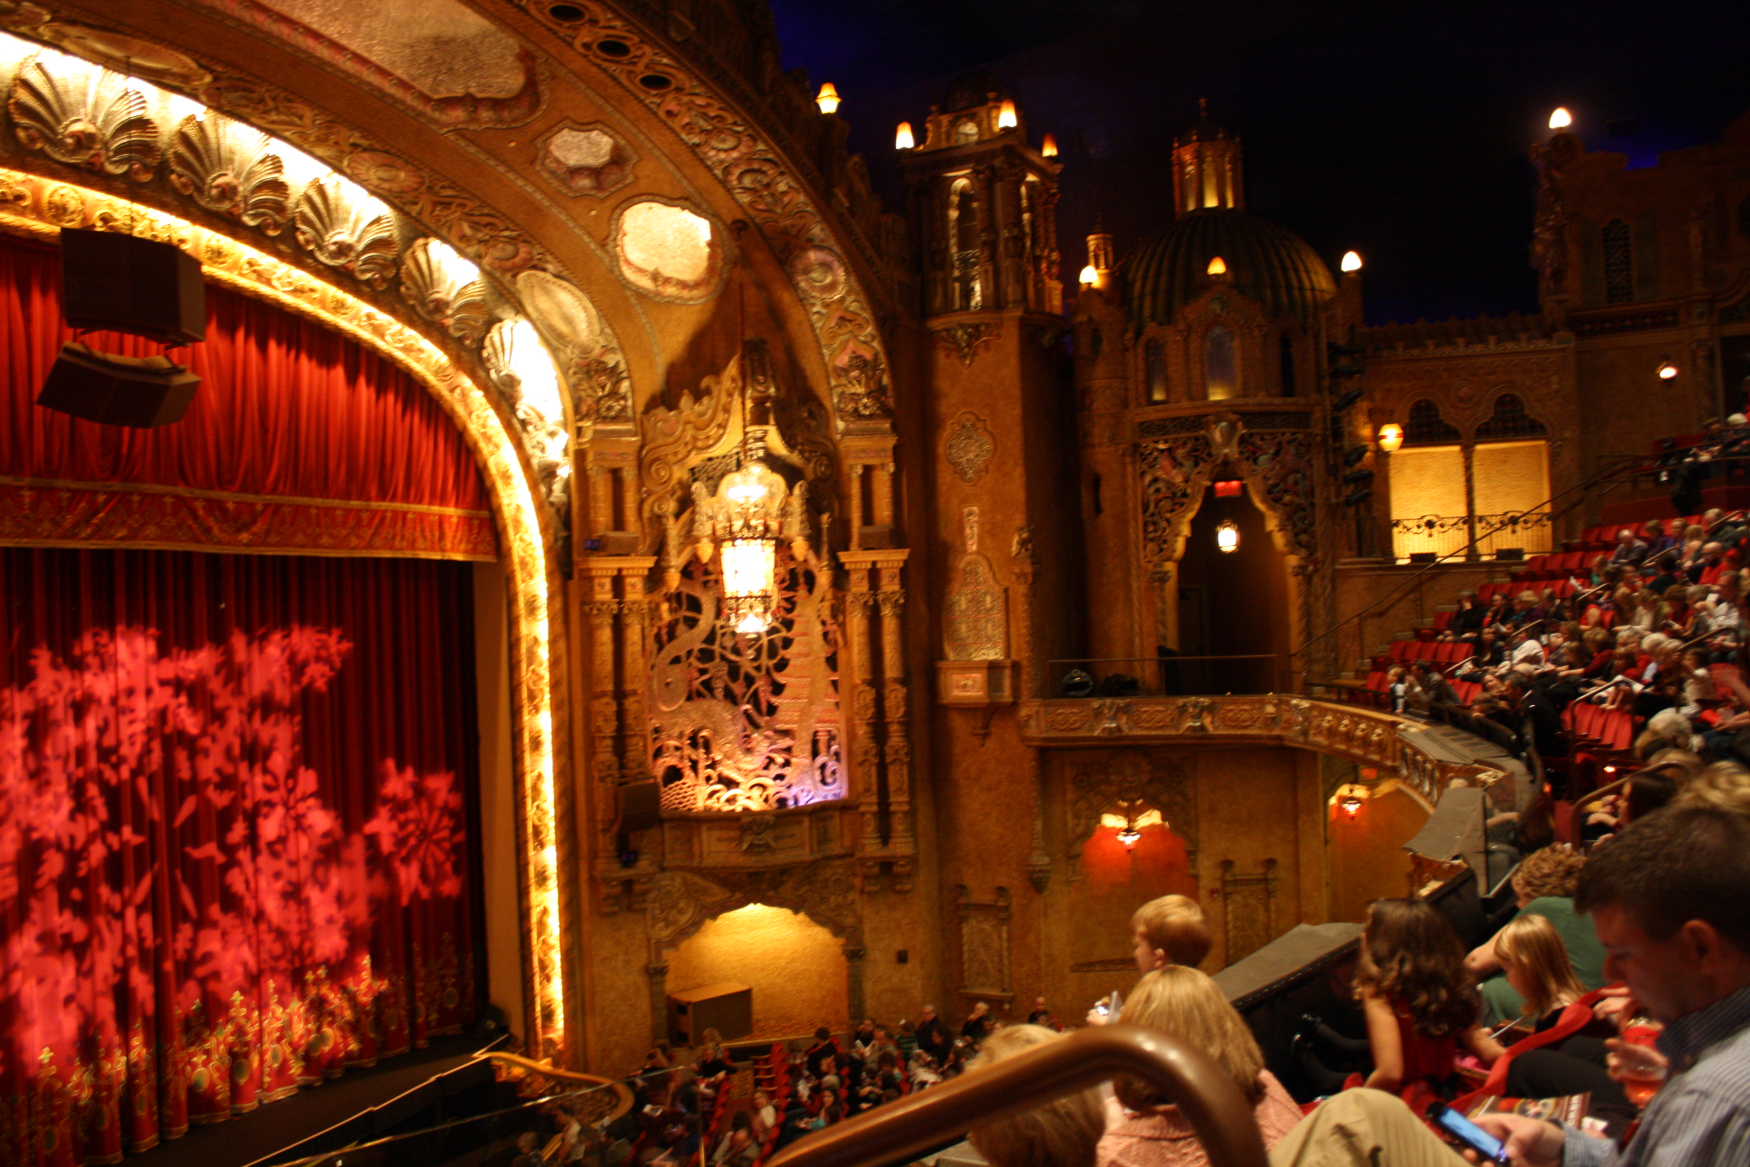 What’s to Like About Rockford: The Nutcracker at The Coronado Theatre